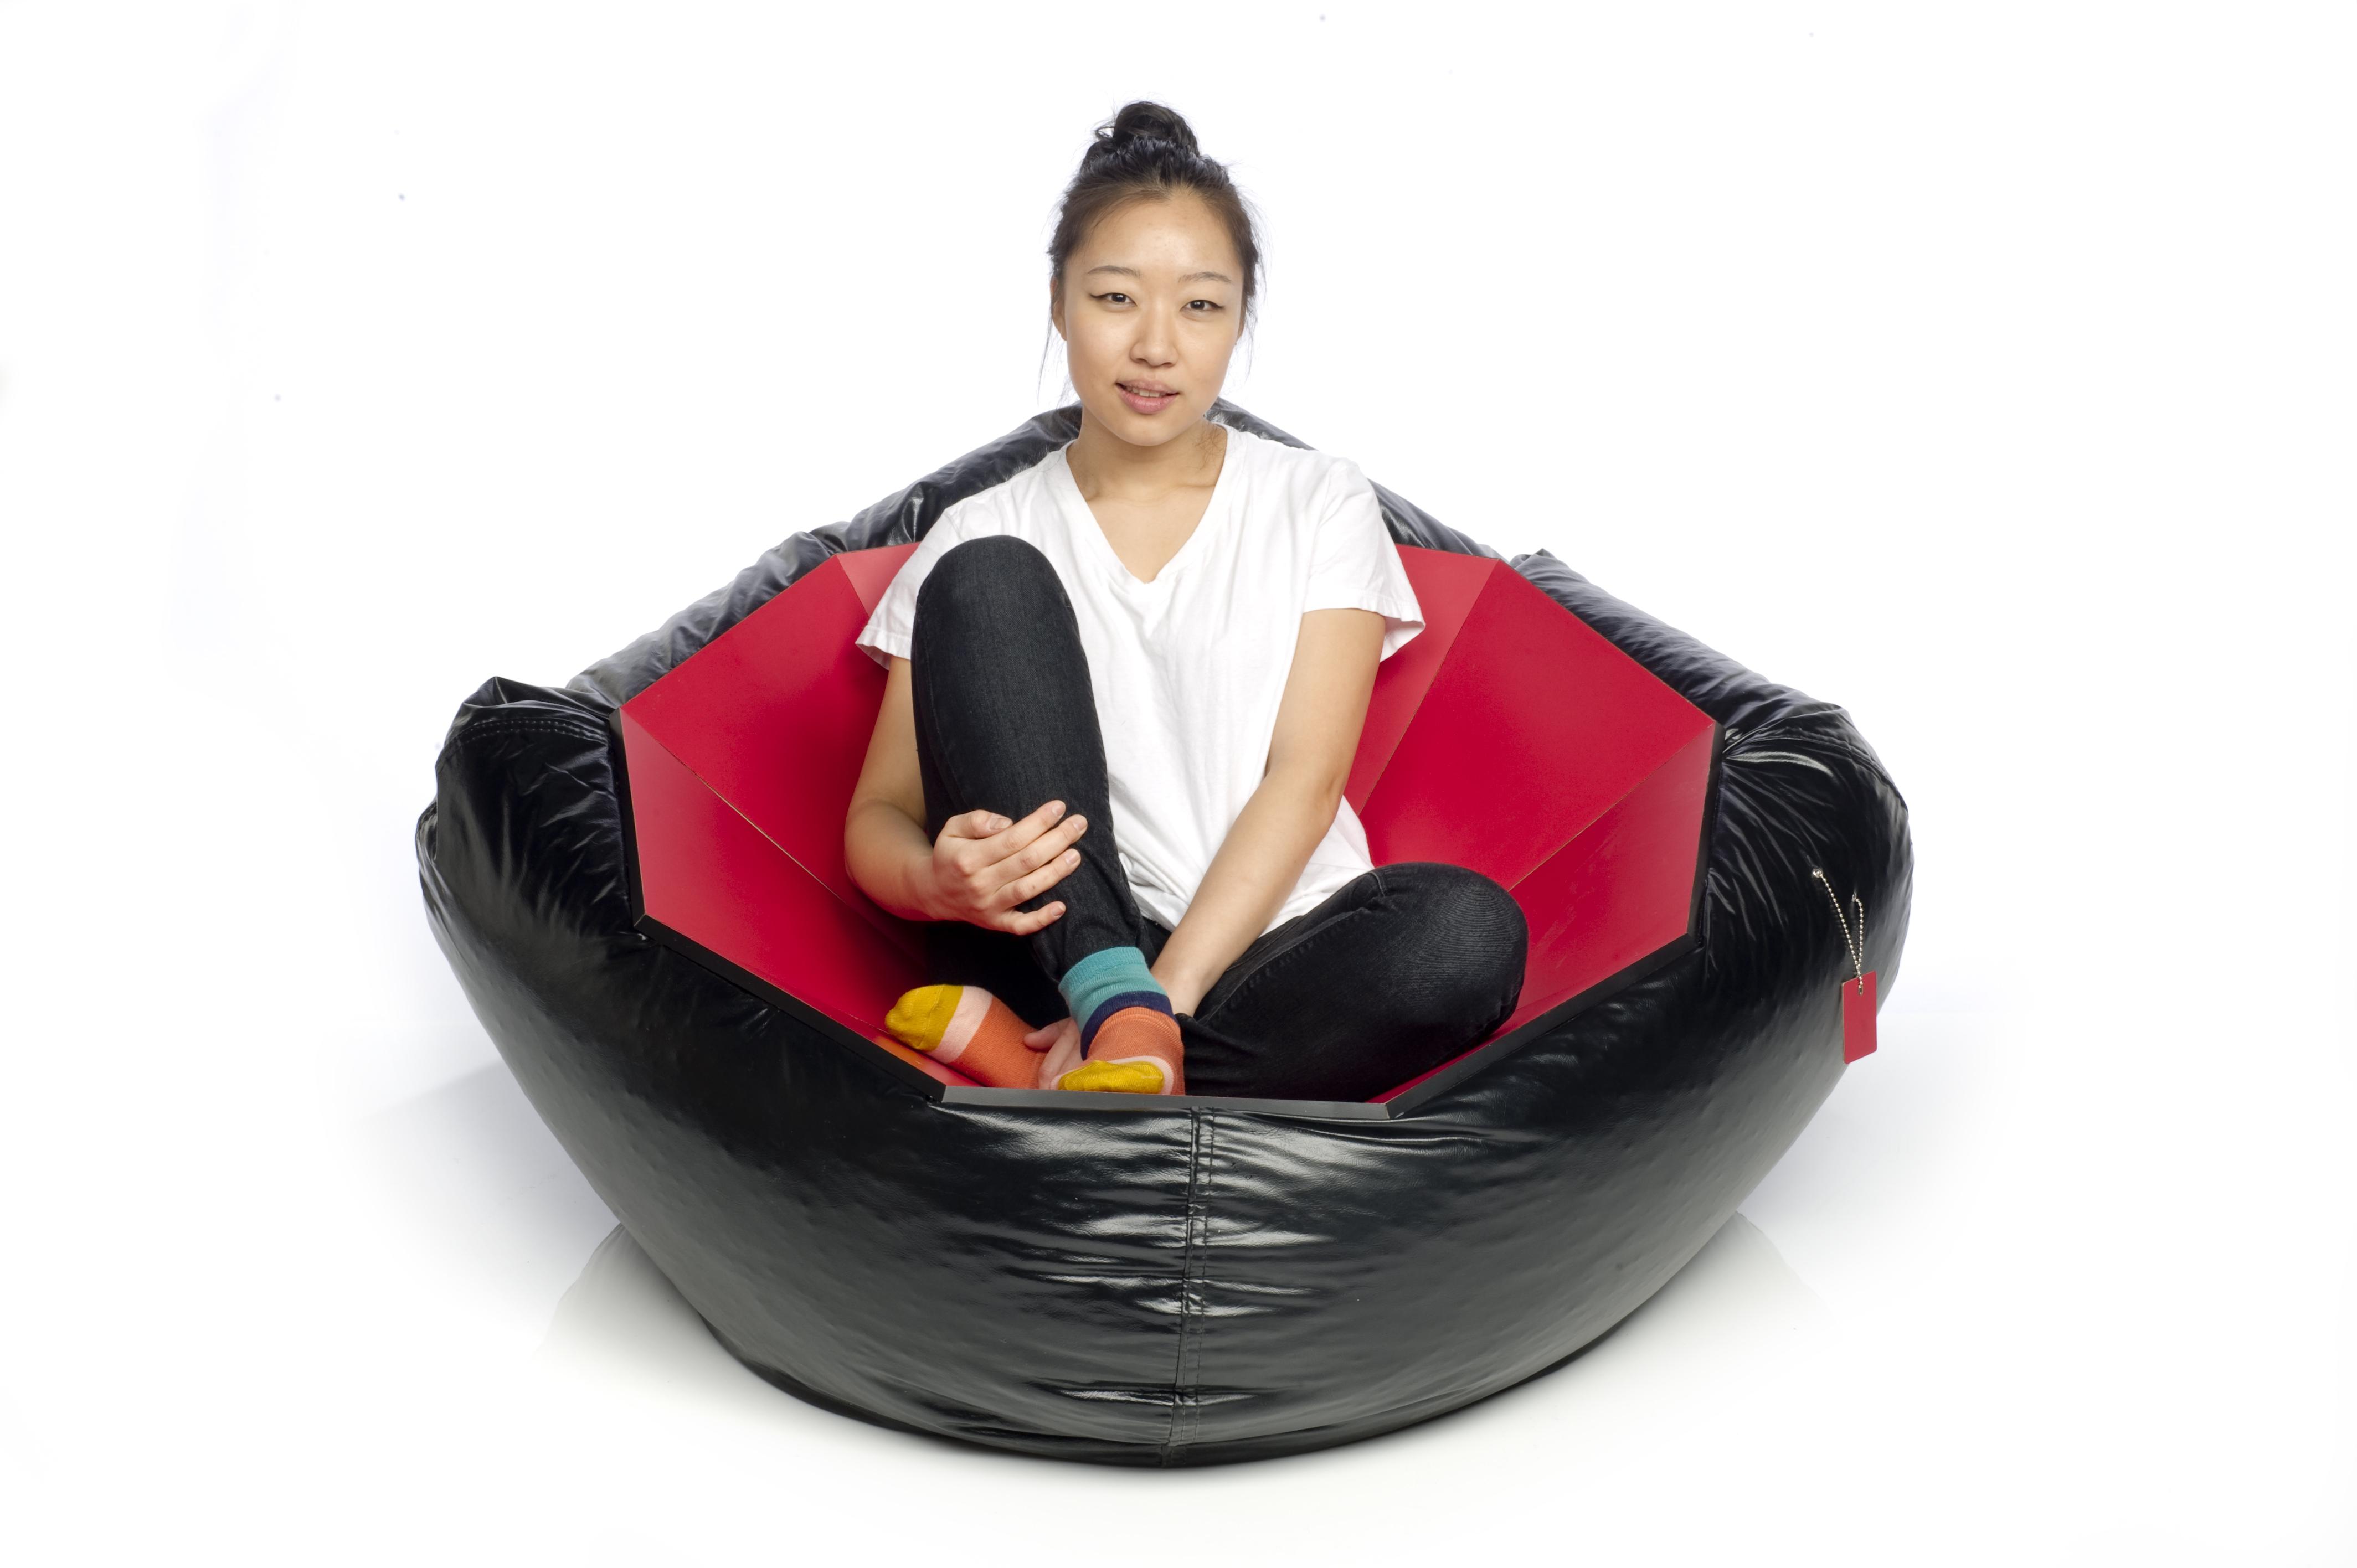 A person sits on a beanbag chair.